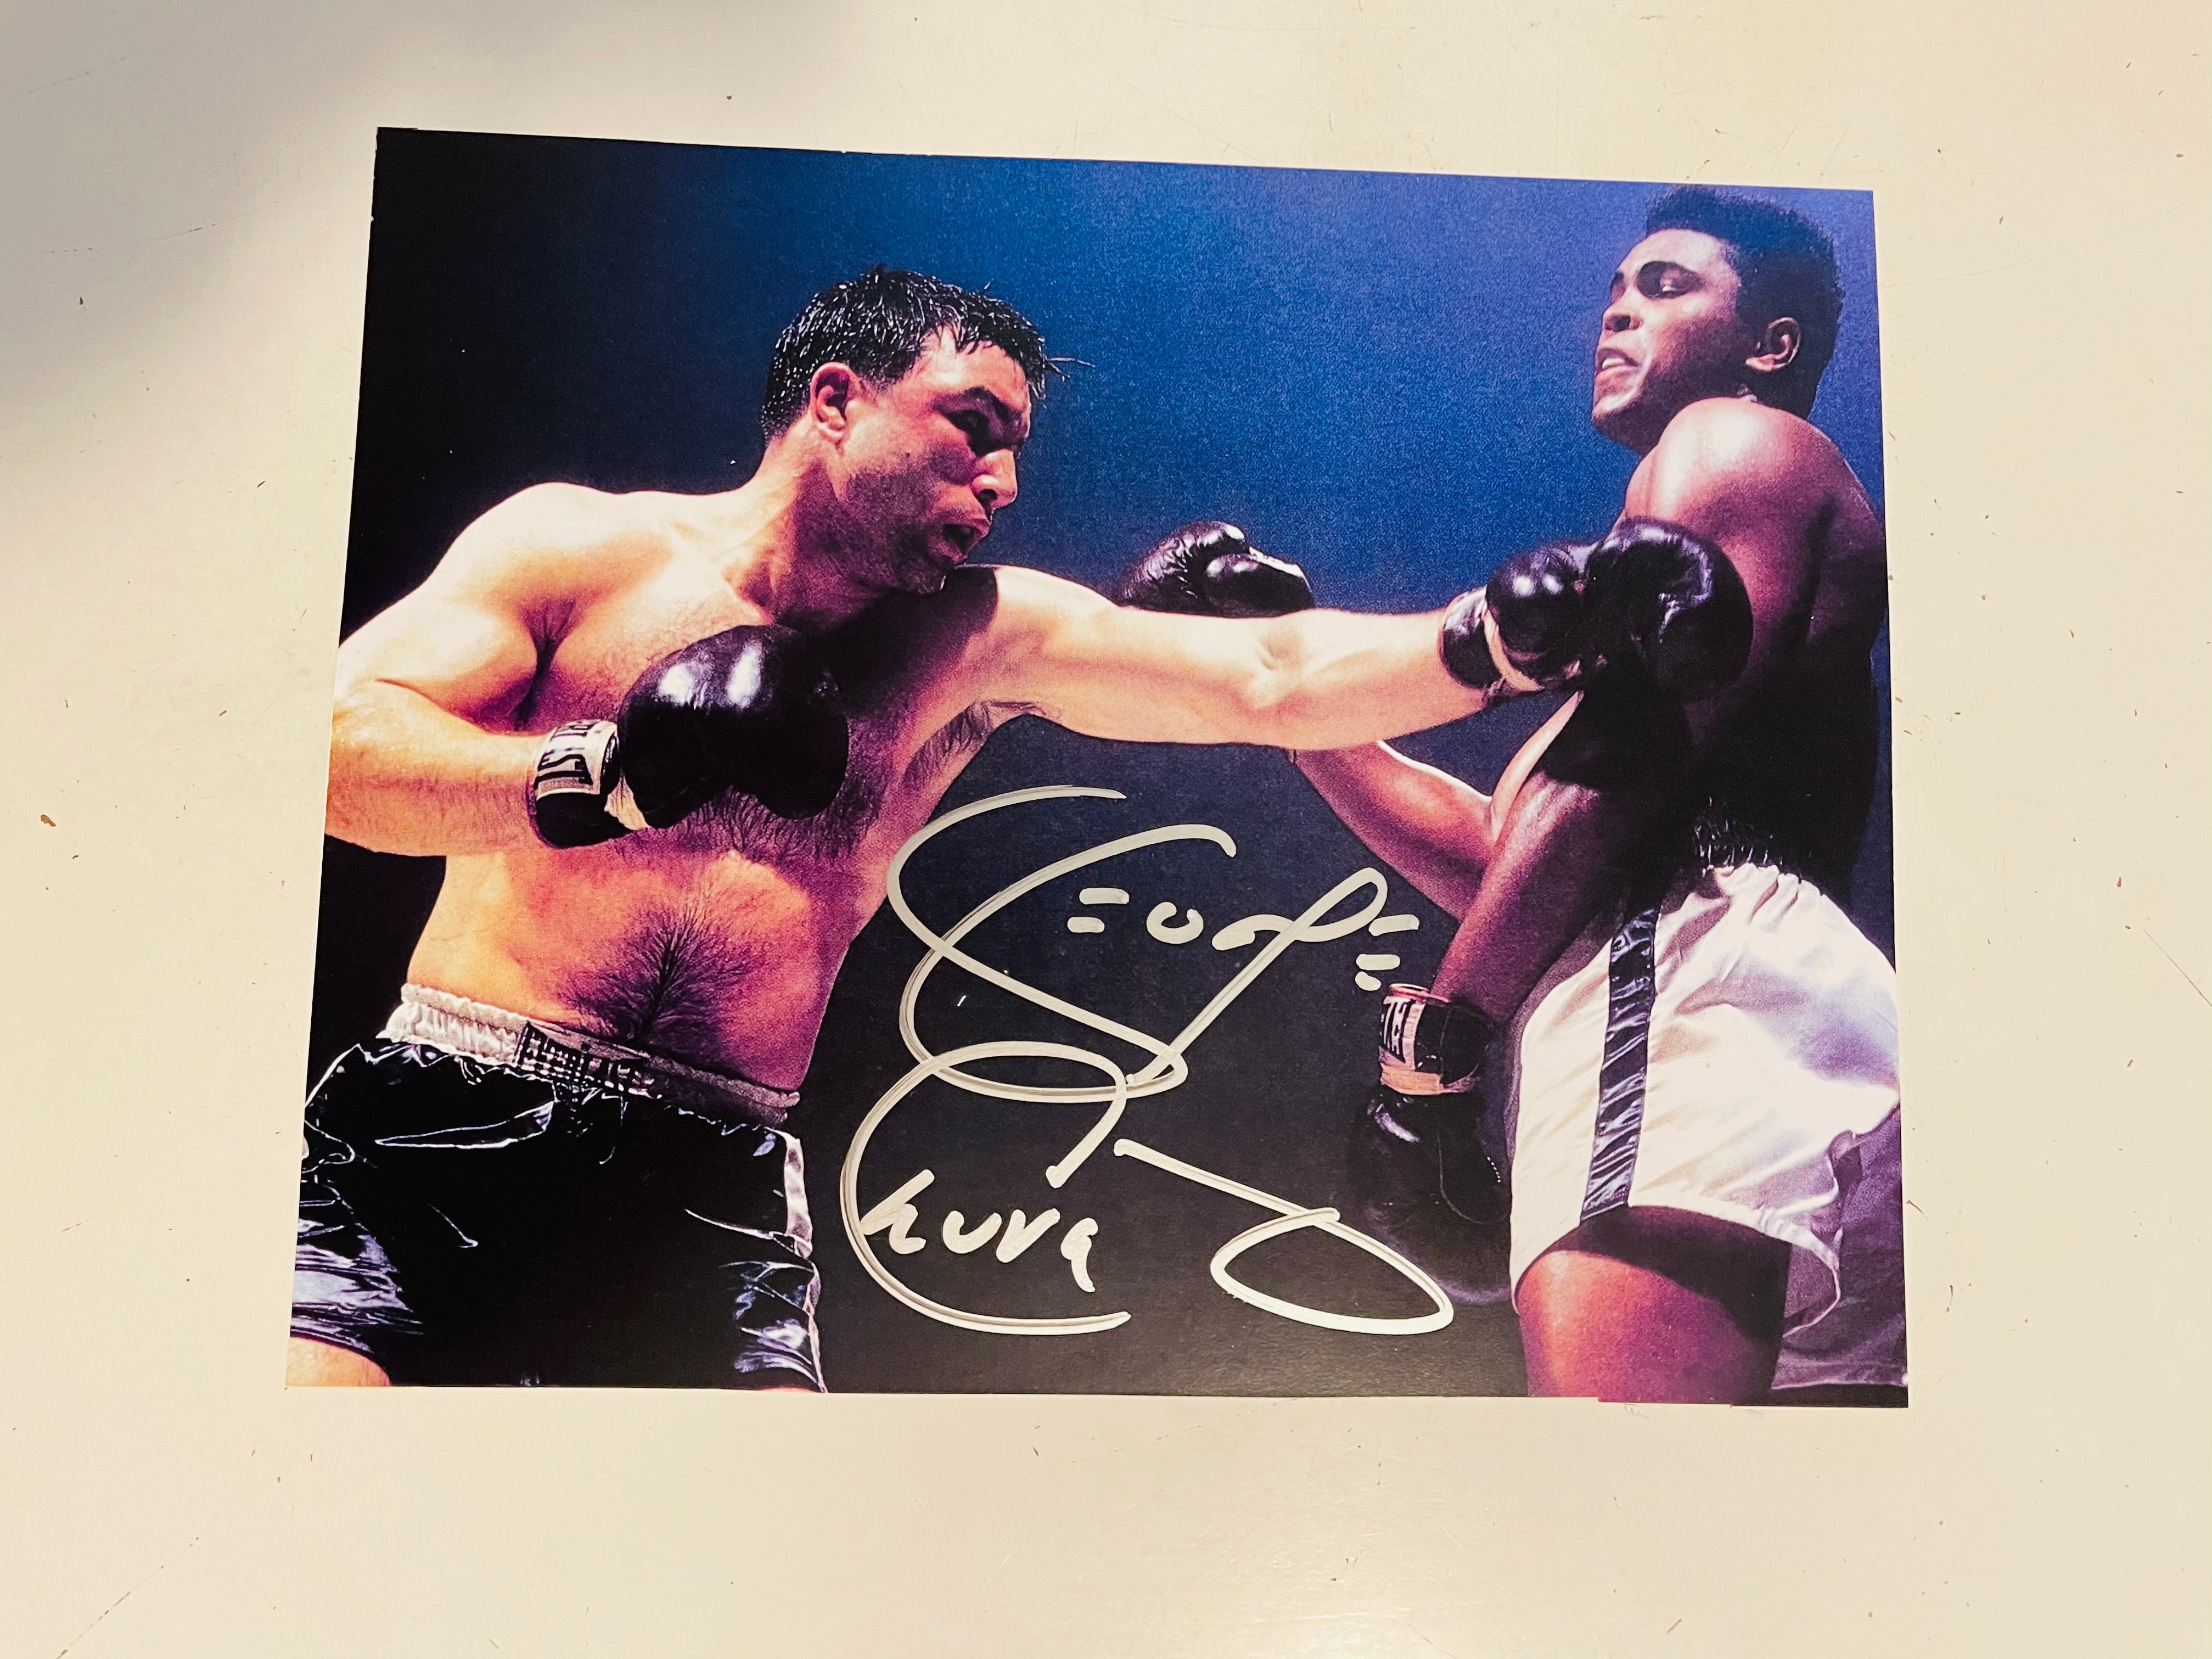 George Chuvalo Boxing legend signed in person 8x10 photo with COA